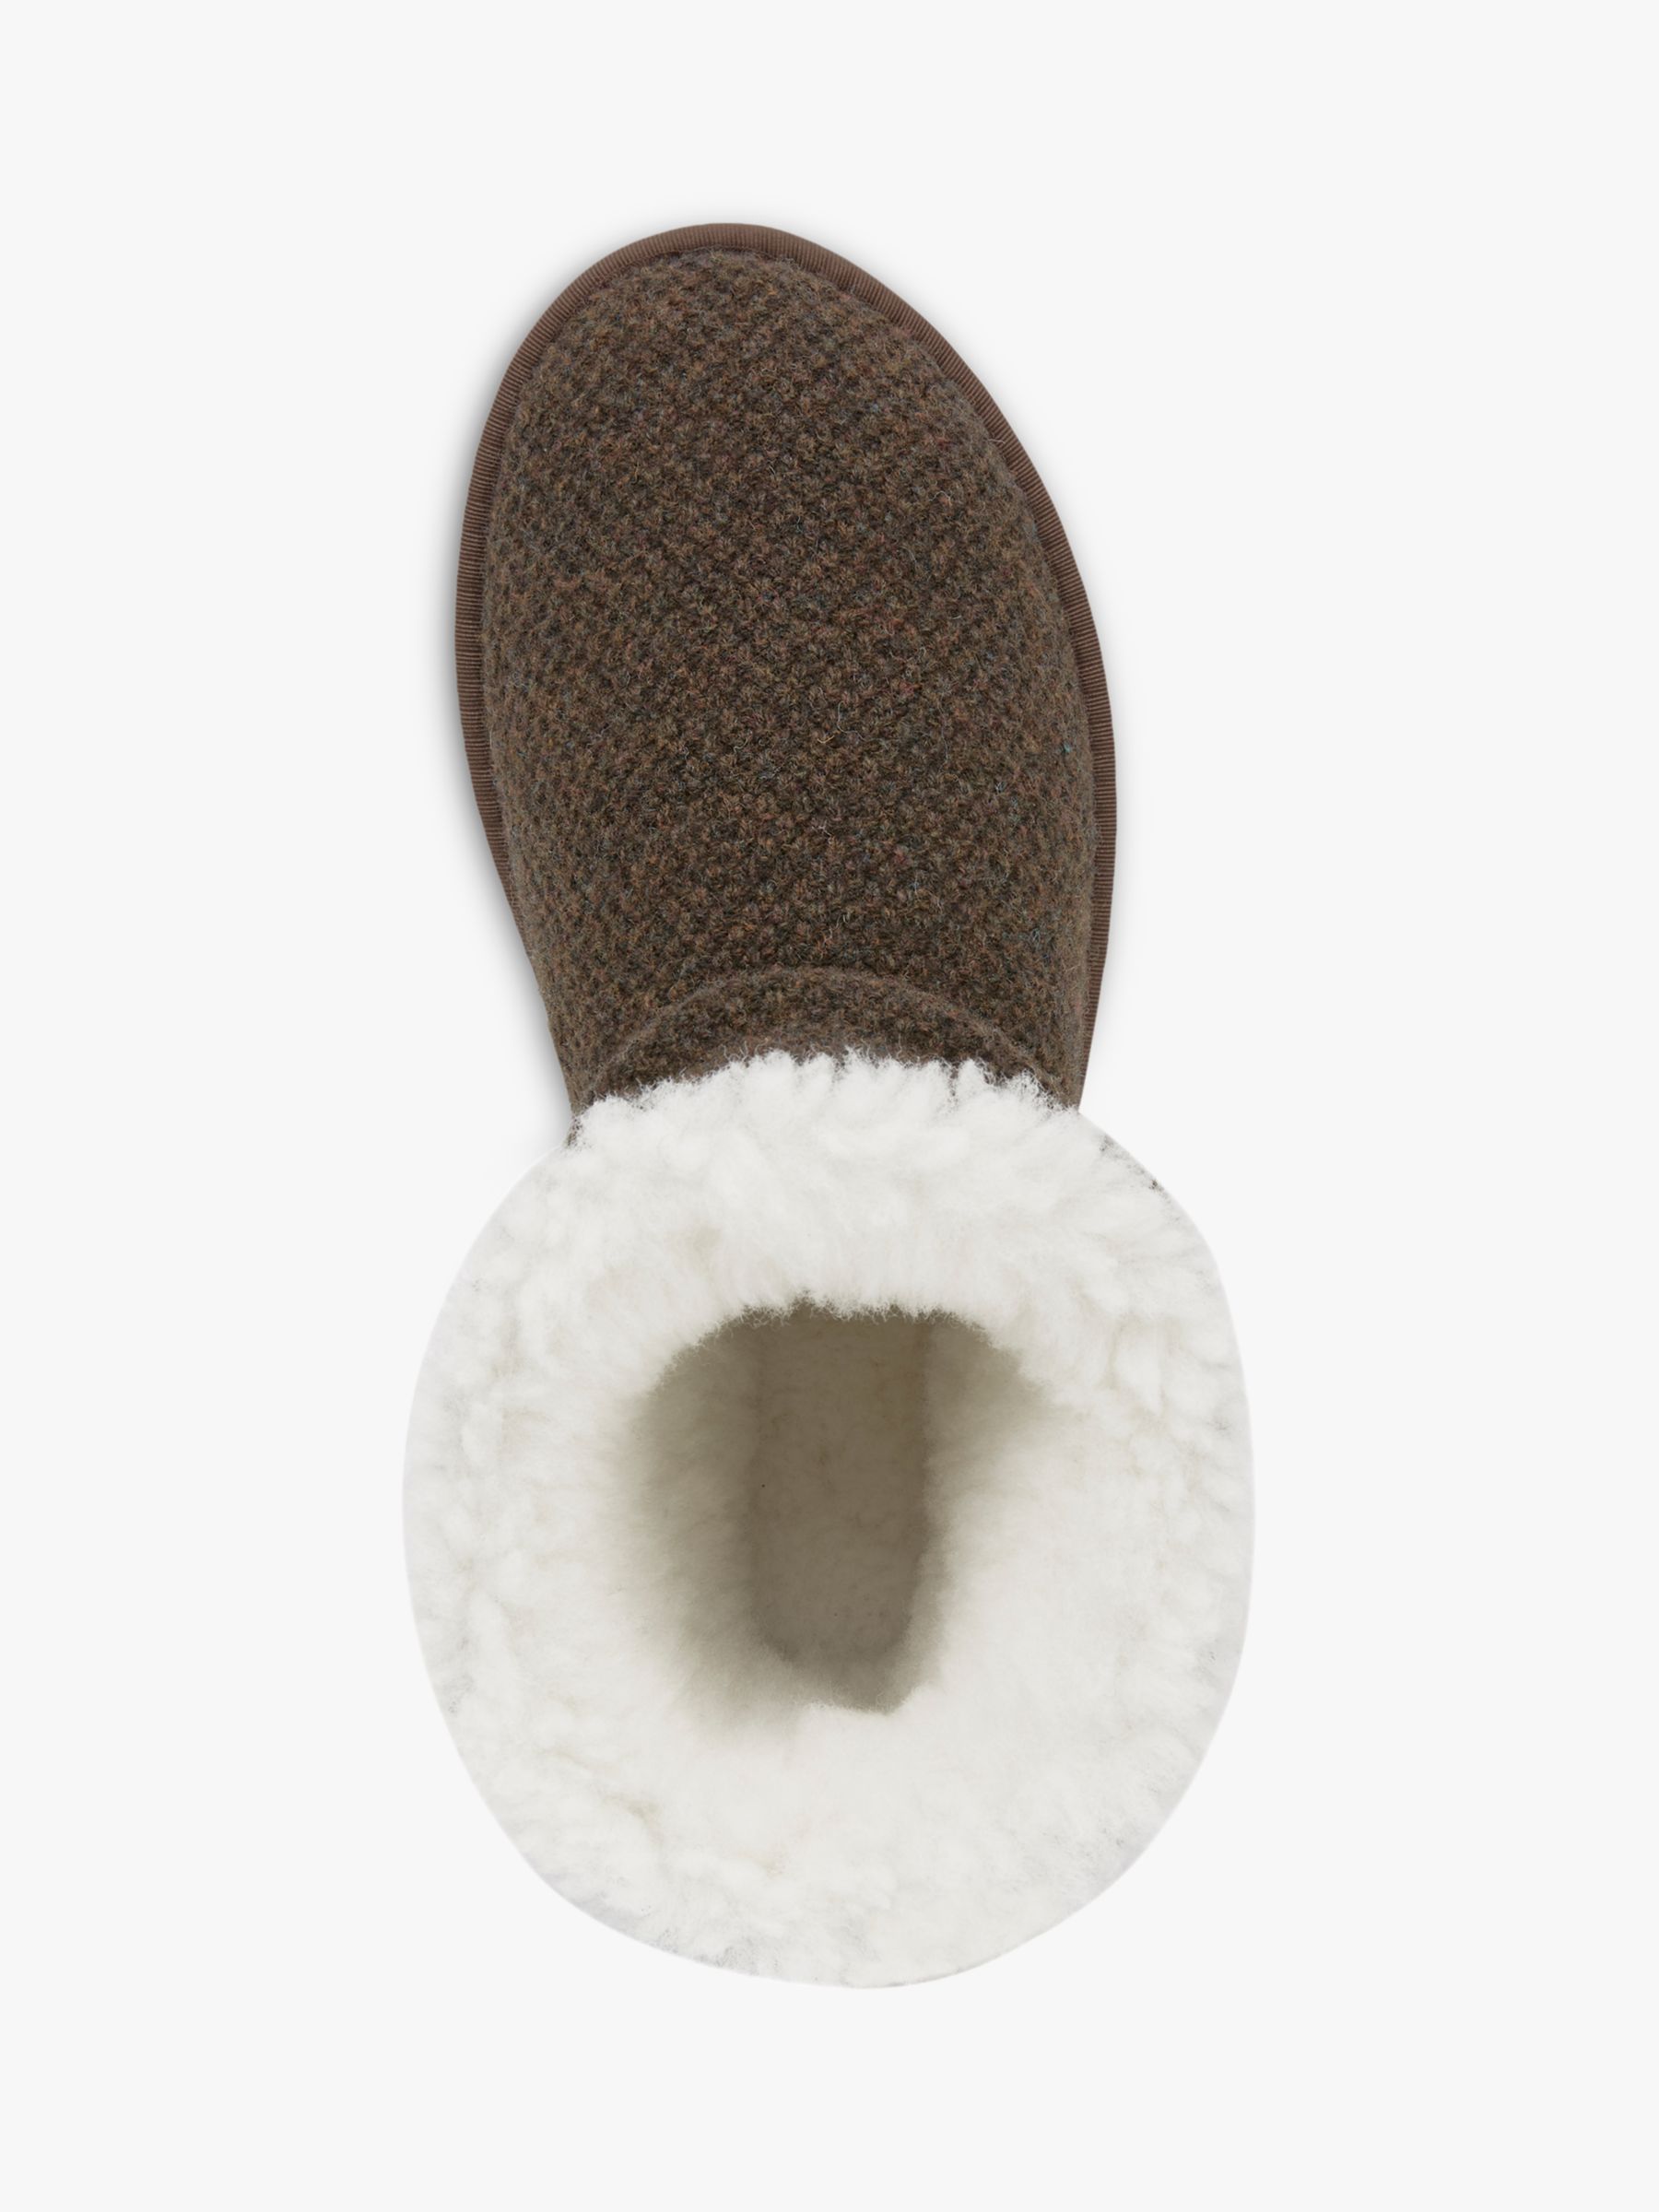 Celtic & Co. Knitted Sheepskin Shortie Slippers, Tanners Brown, 8